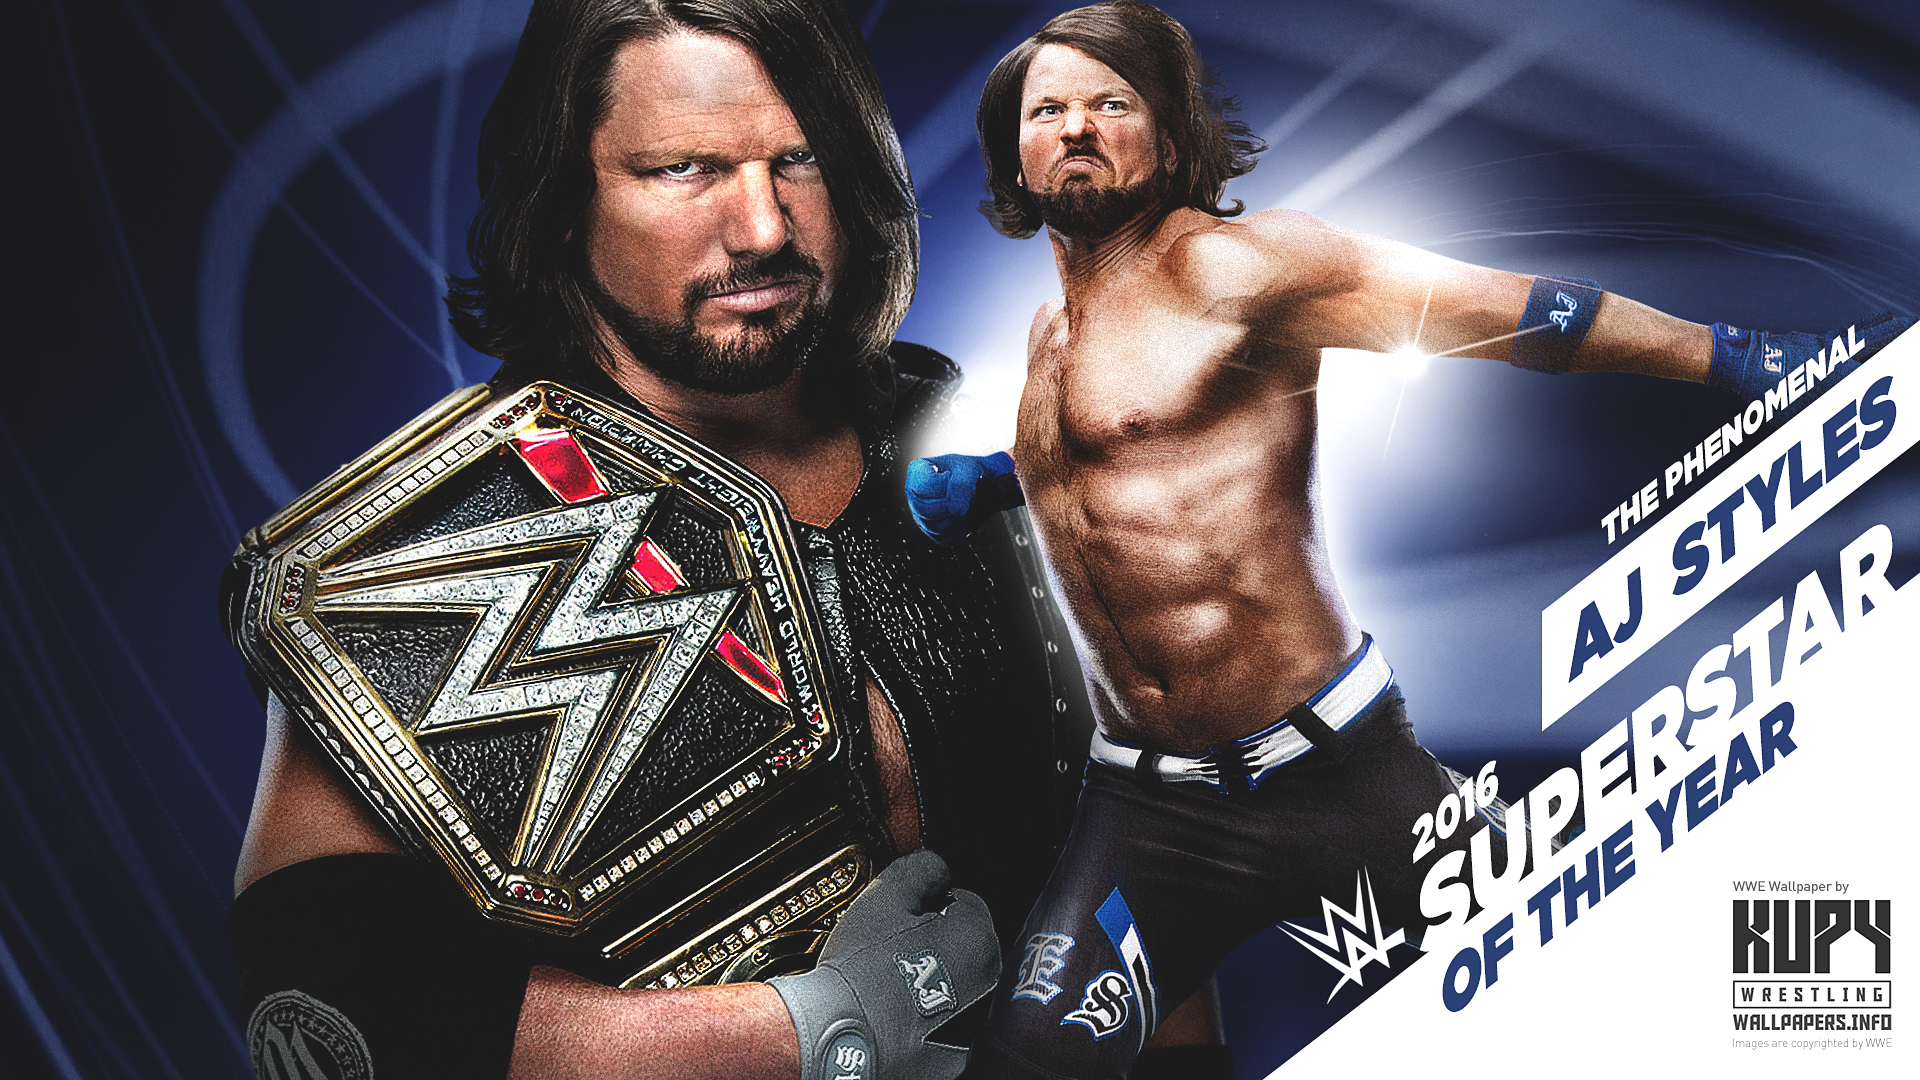 NEW AJ Styles 2016 WWE Superstar of the Year wallpaper! - Kupy Wrestling  Wallpapers